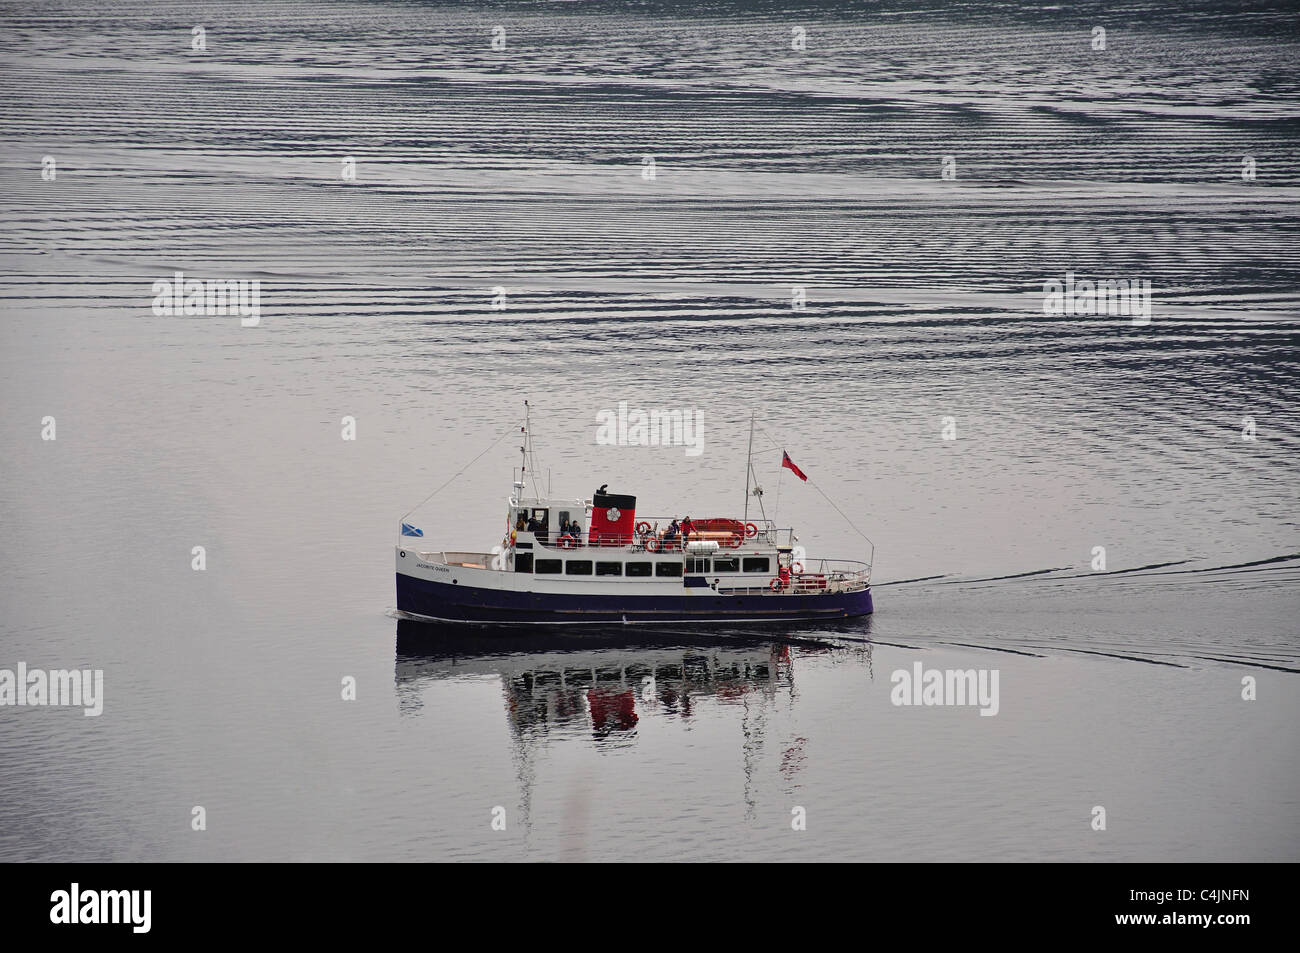 Jacobite Queen cruise boat on Loch Ness, Scottish Highlands, Scotland, United Kingdom Stock Photo